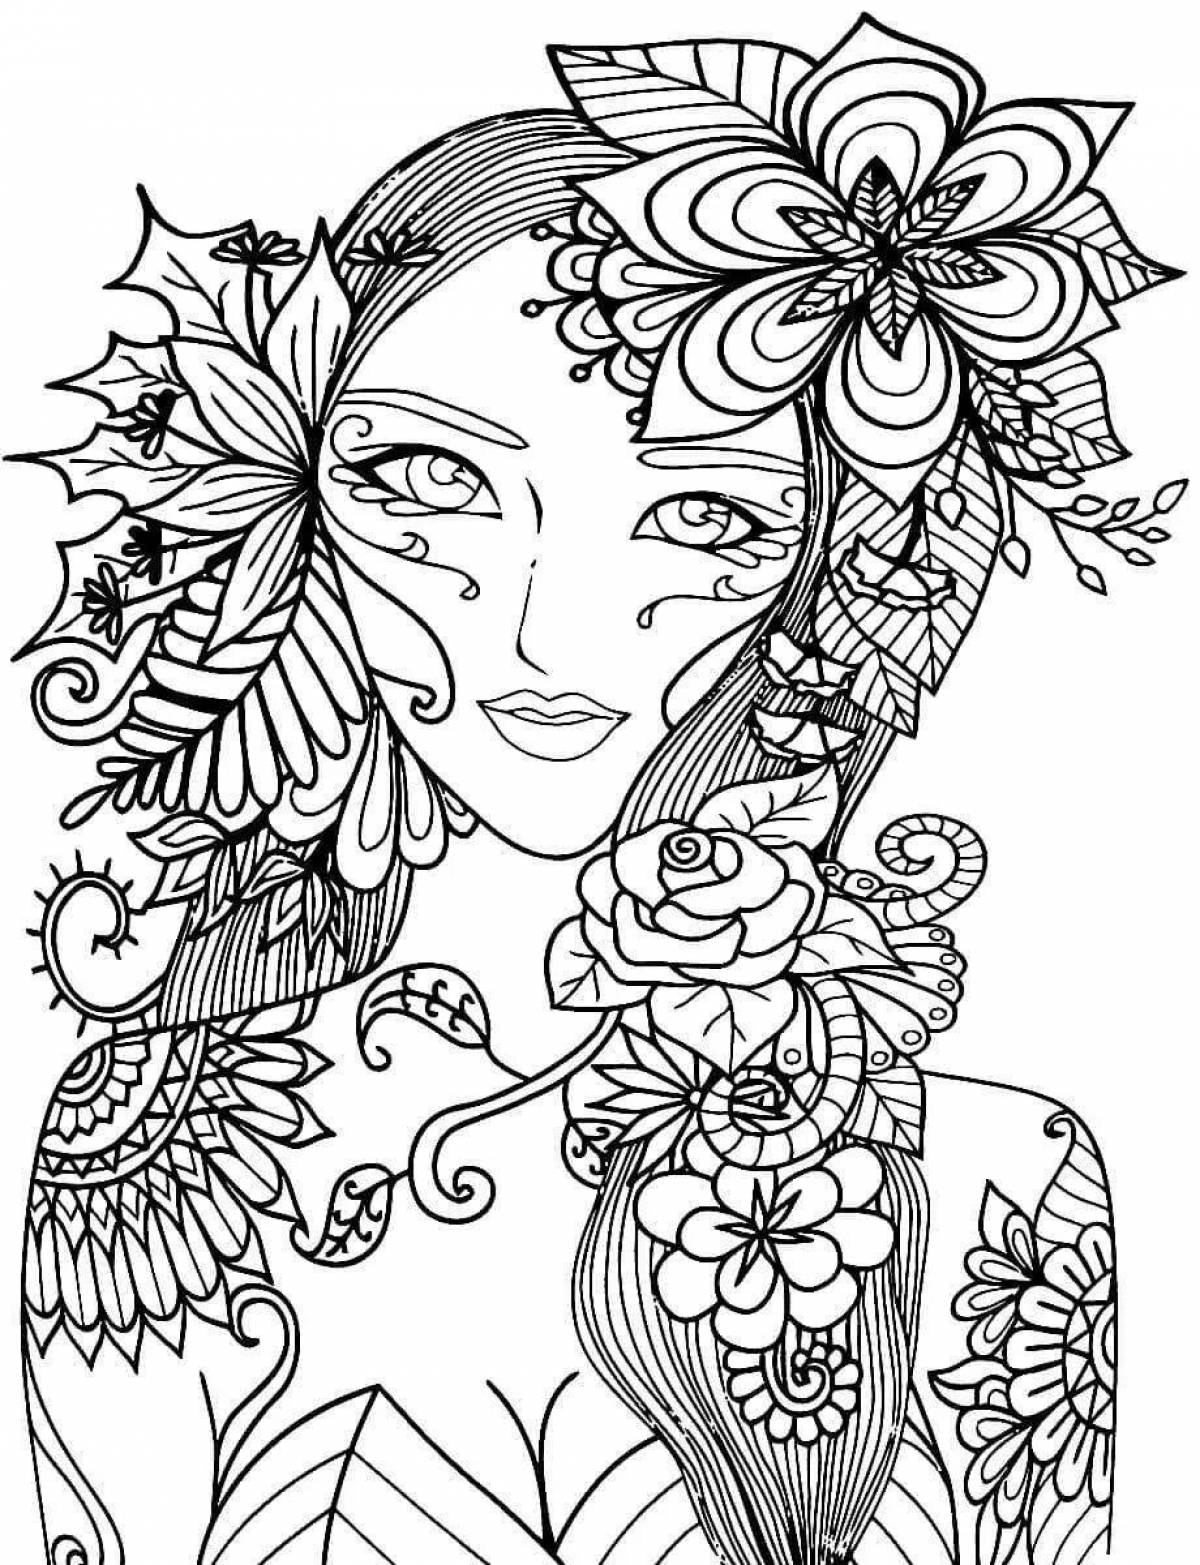 Blissful coloring for 10 years for girls antistress